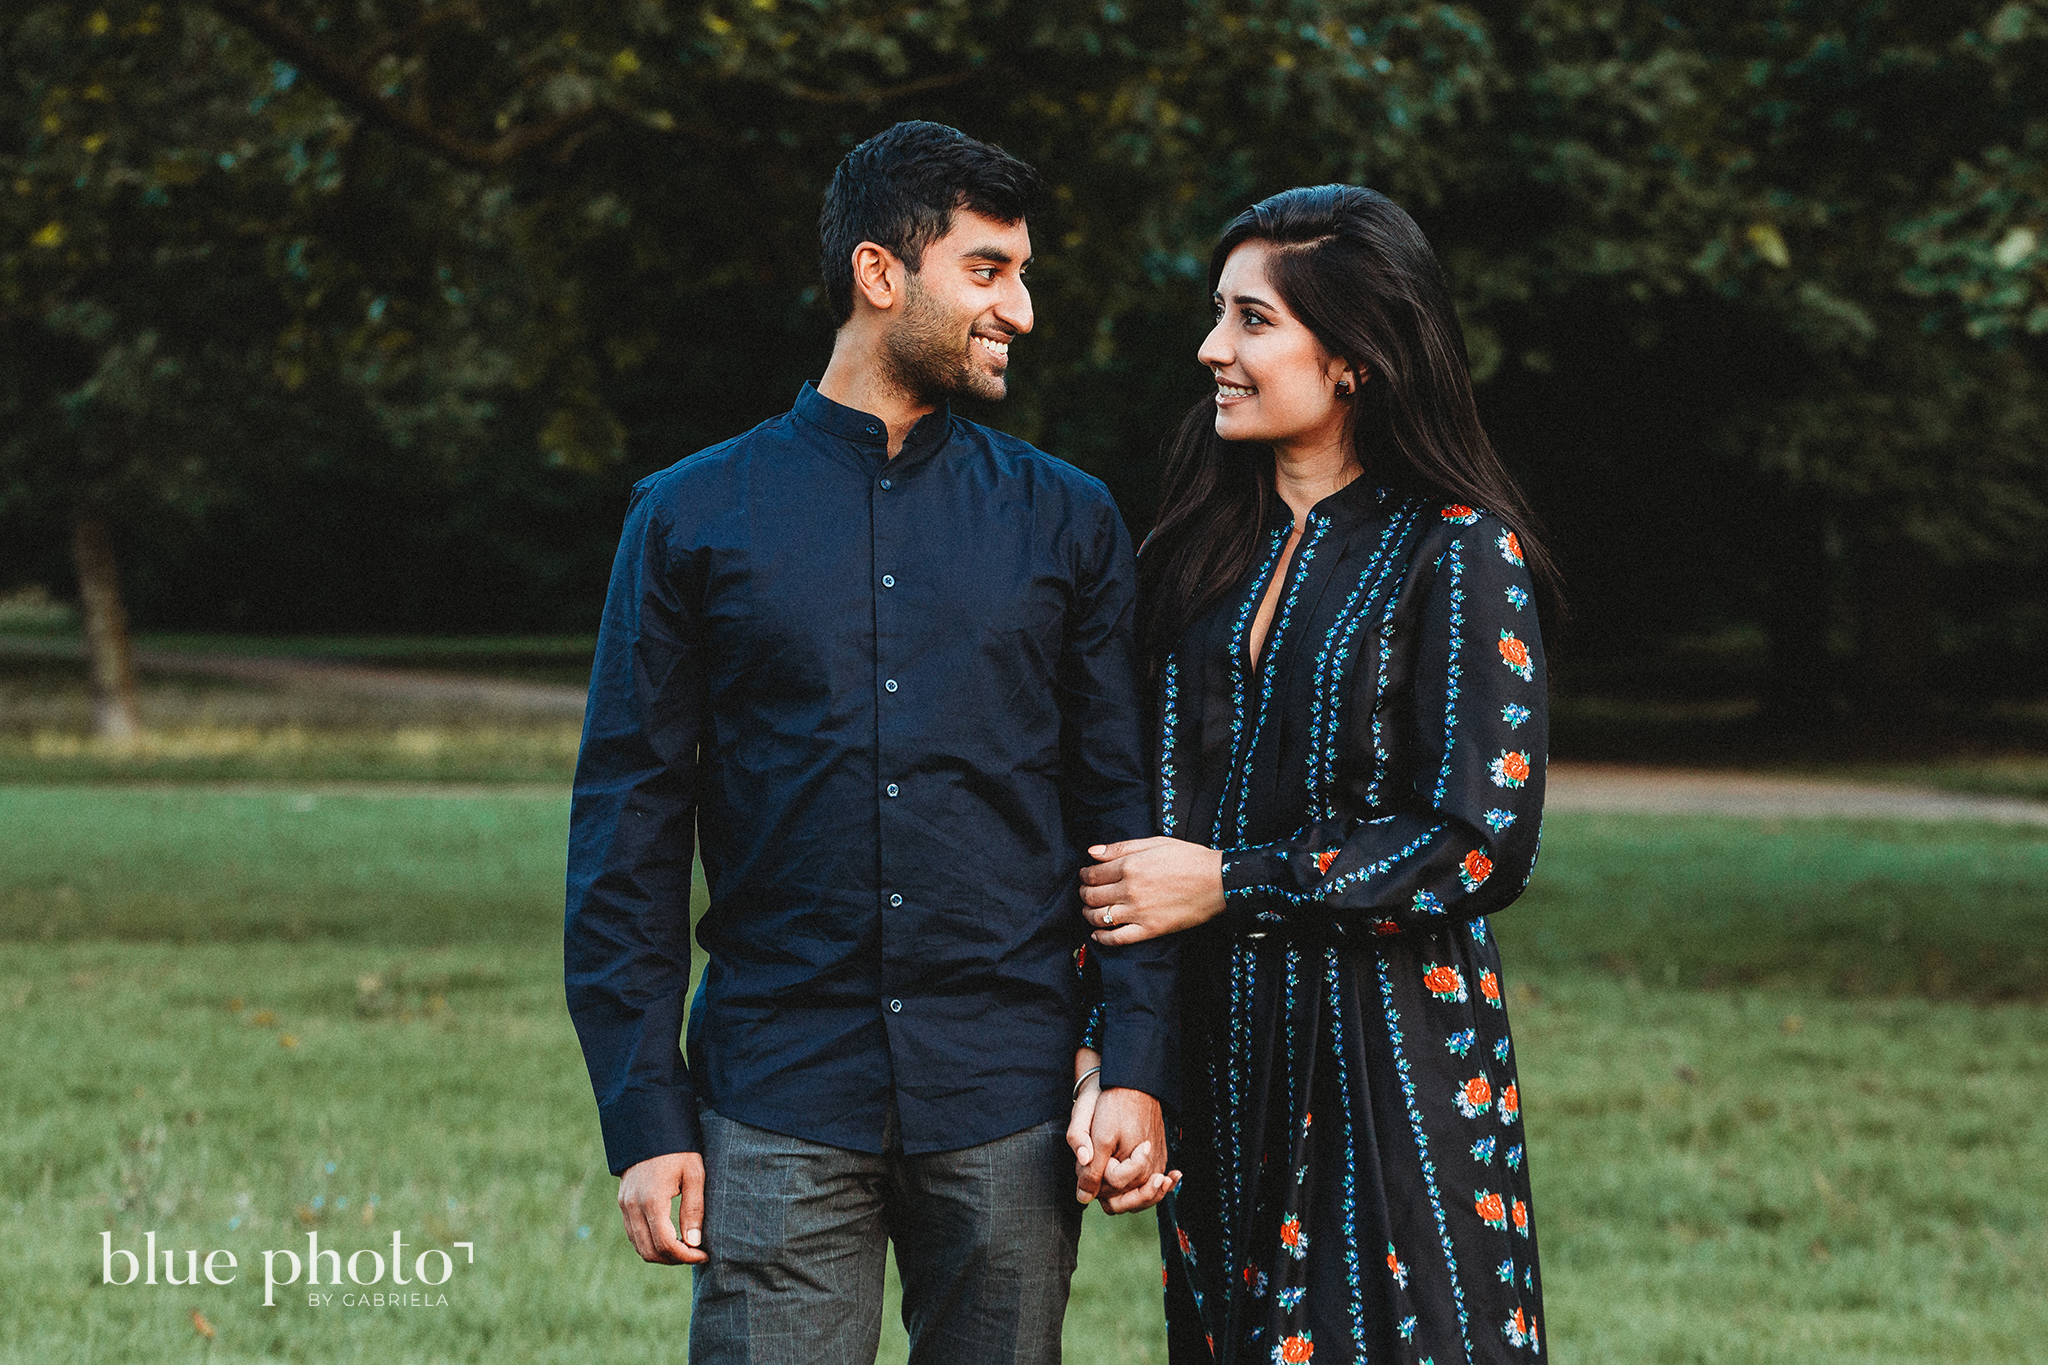 Engagement session in Kensingtom Gardens, Central London. A couple is looking at each other and smilling.  